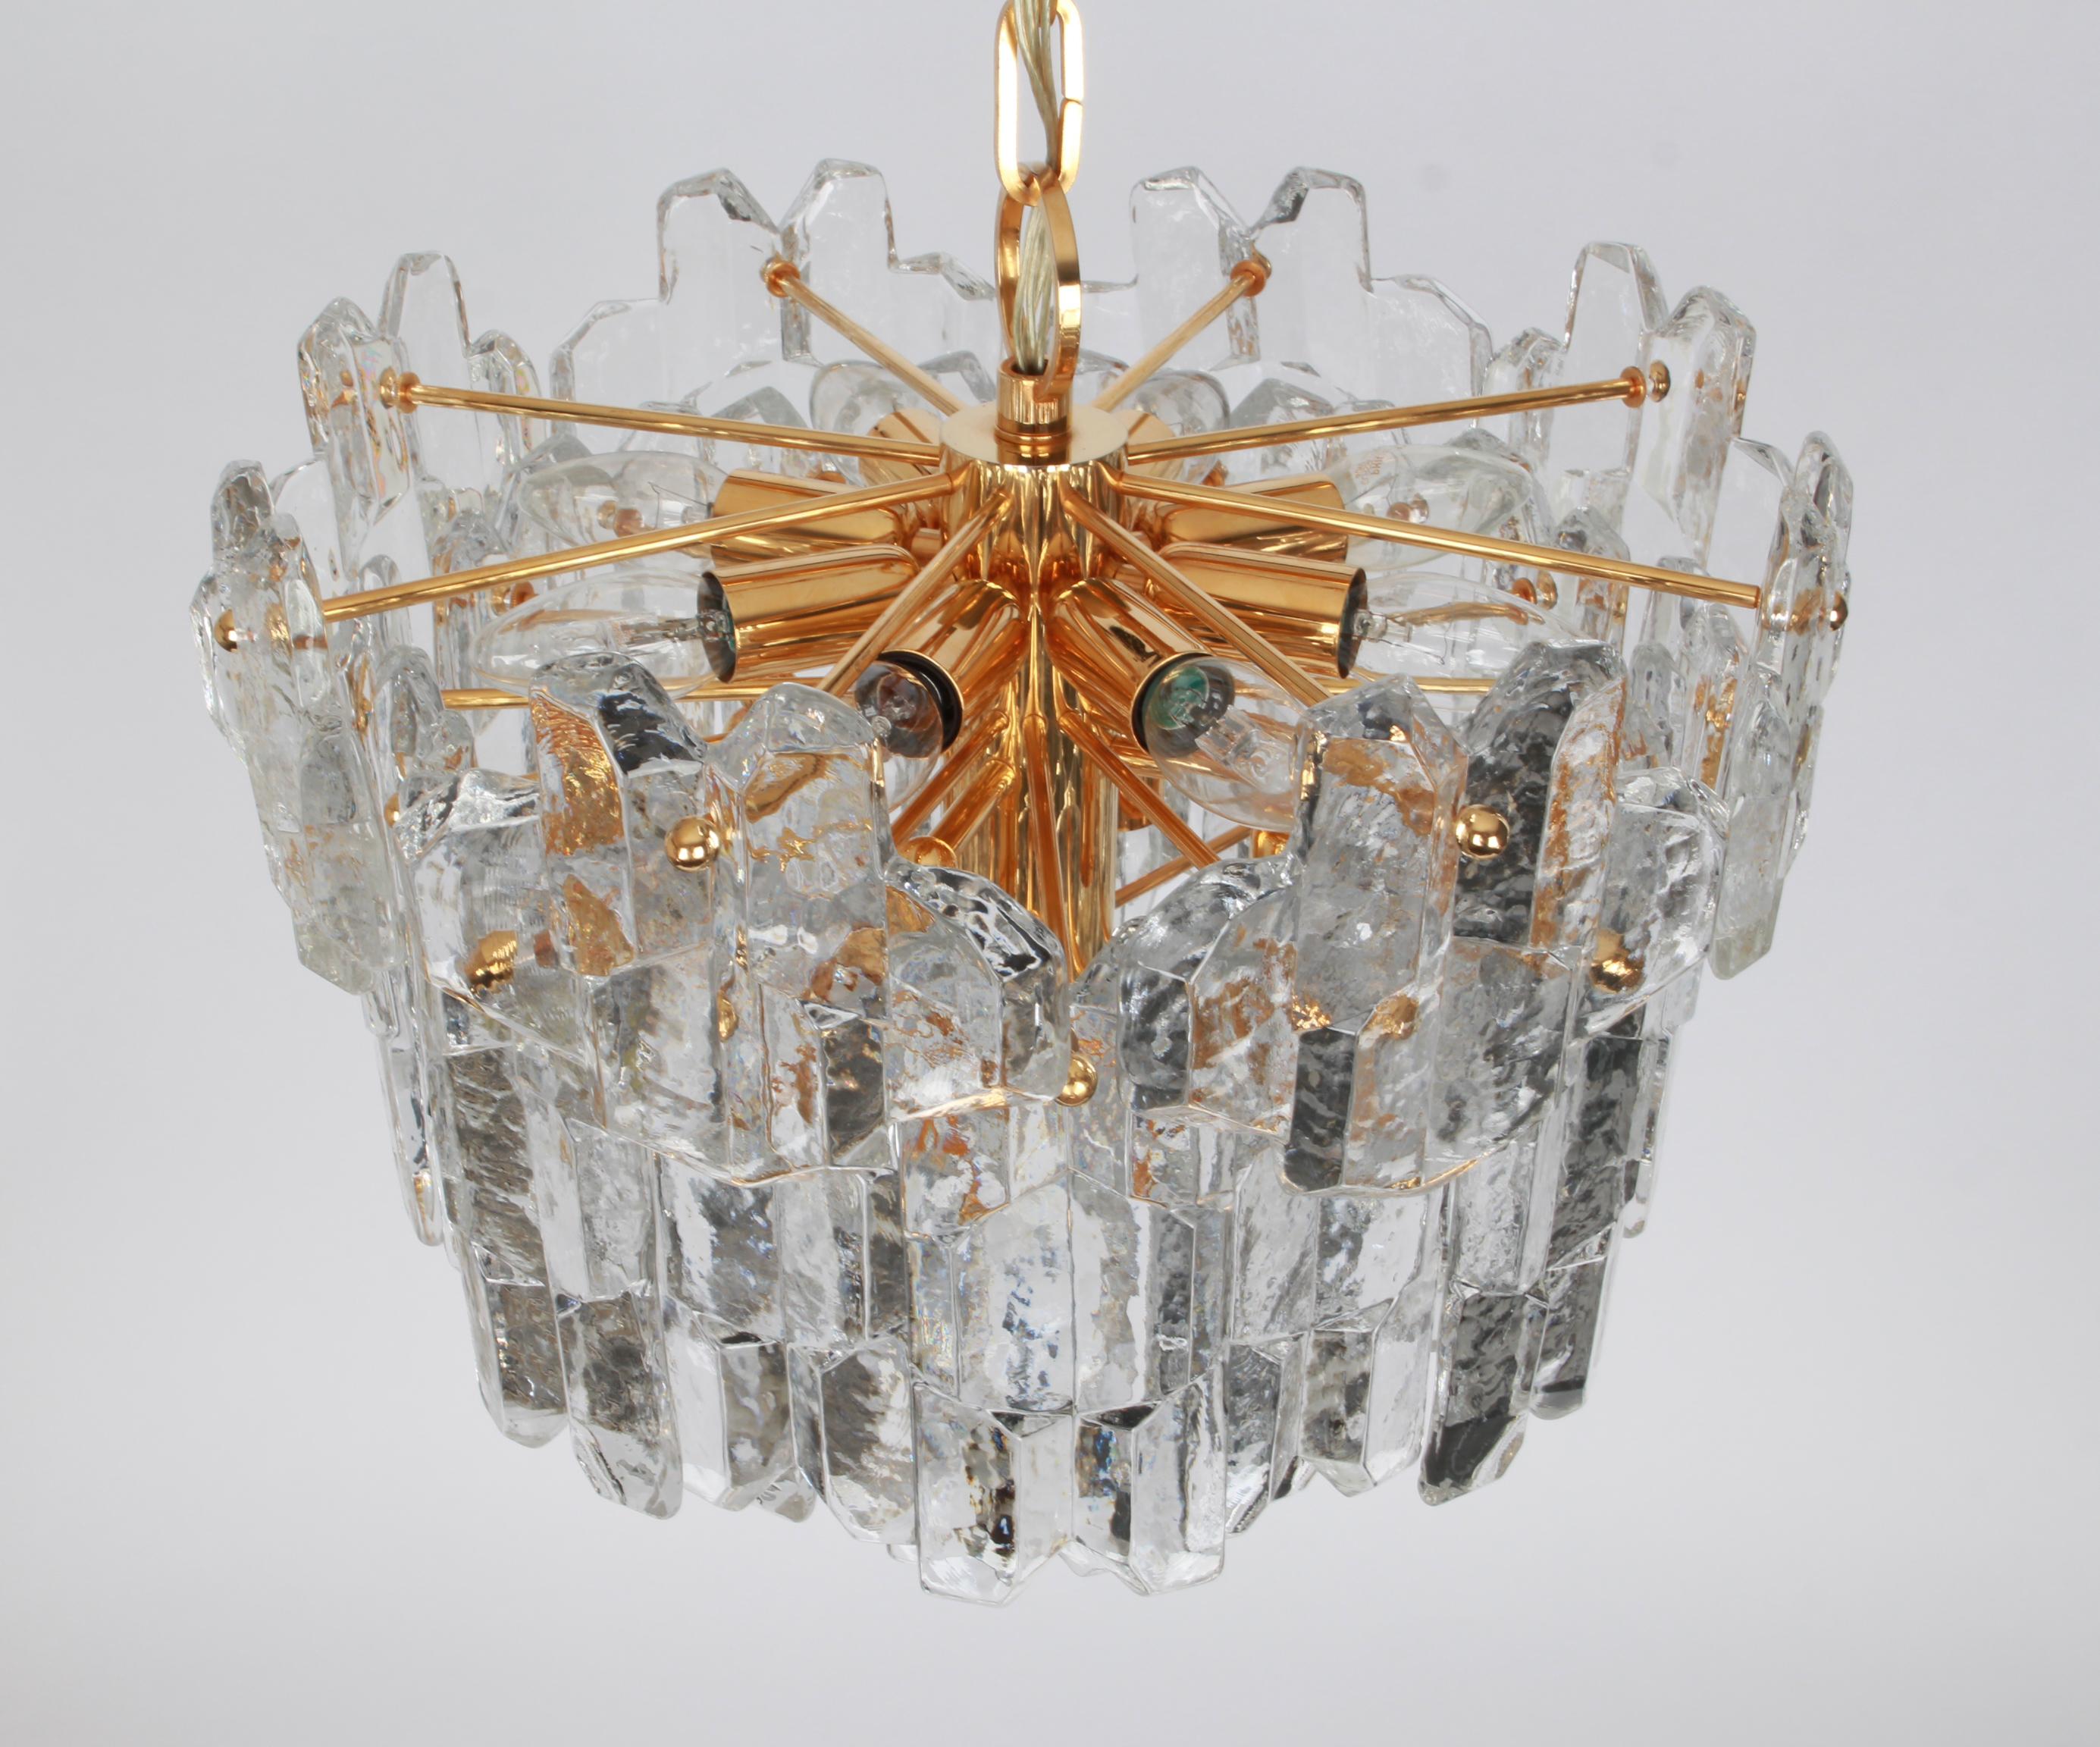 Wonderful gilt brass chandelier comprises crystal Murano glass pieces on a gilded brass frame. It’s made by Kalmar (Series: Palazzo), Austria, manufactured, circa 1970-1979.

4 tiers structure gathering many structured glasses, beautifully